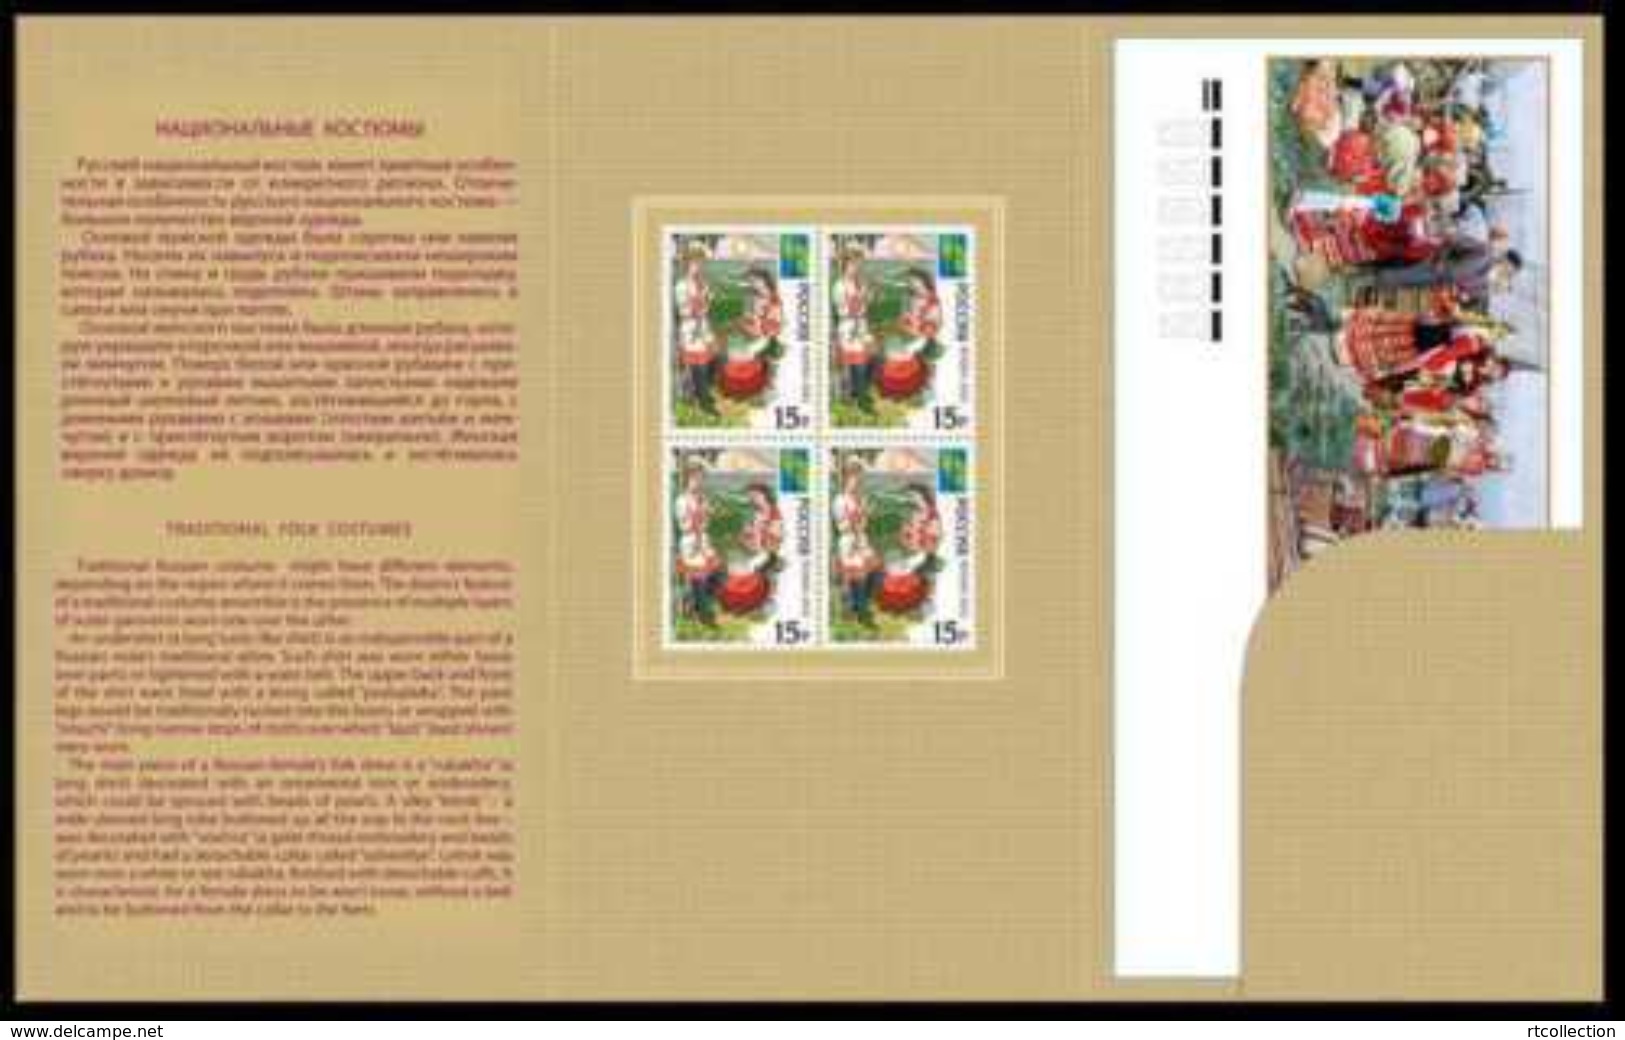 Russia 2012 Souvenir Pack Booklet Block Of 4 Stamps & FDC Art Folk Custumes Cloth Cultures Dress Joint Issue RCC Member - Collections